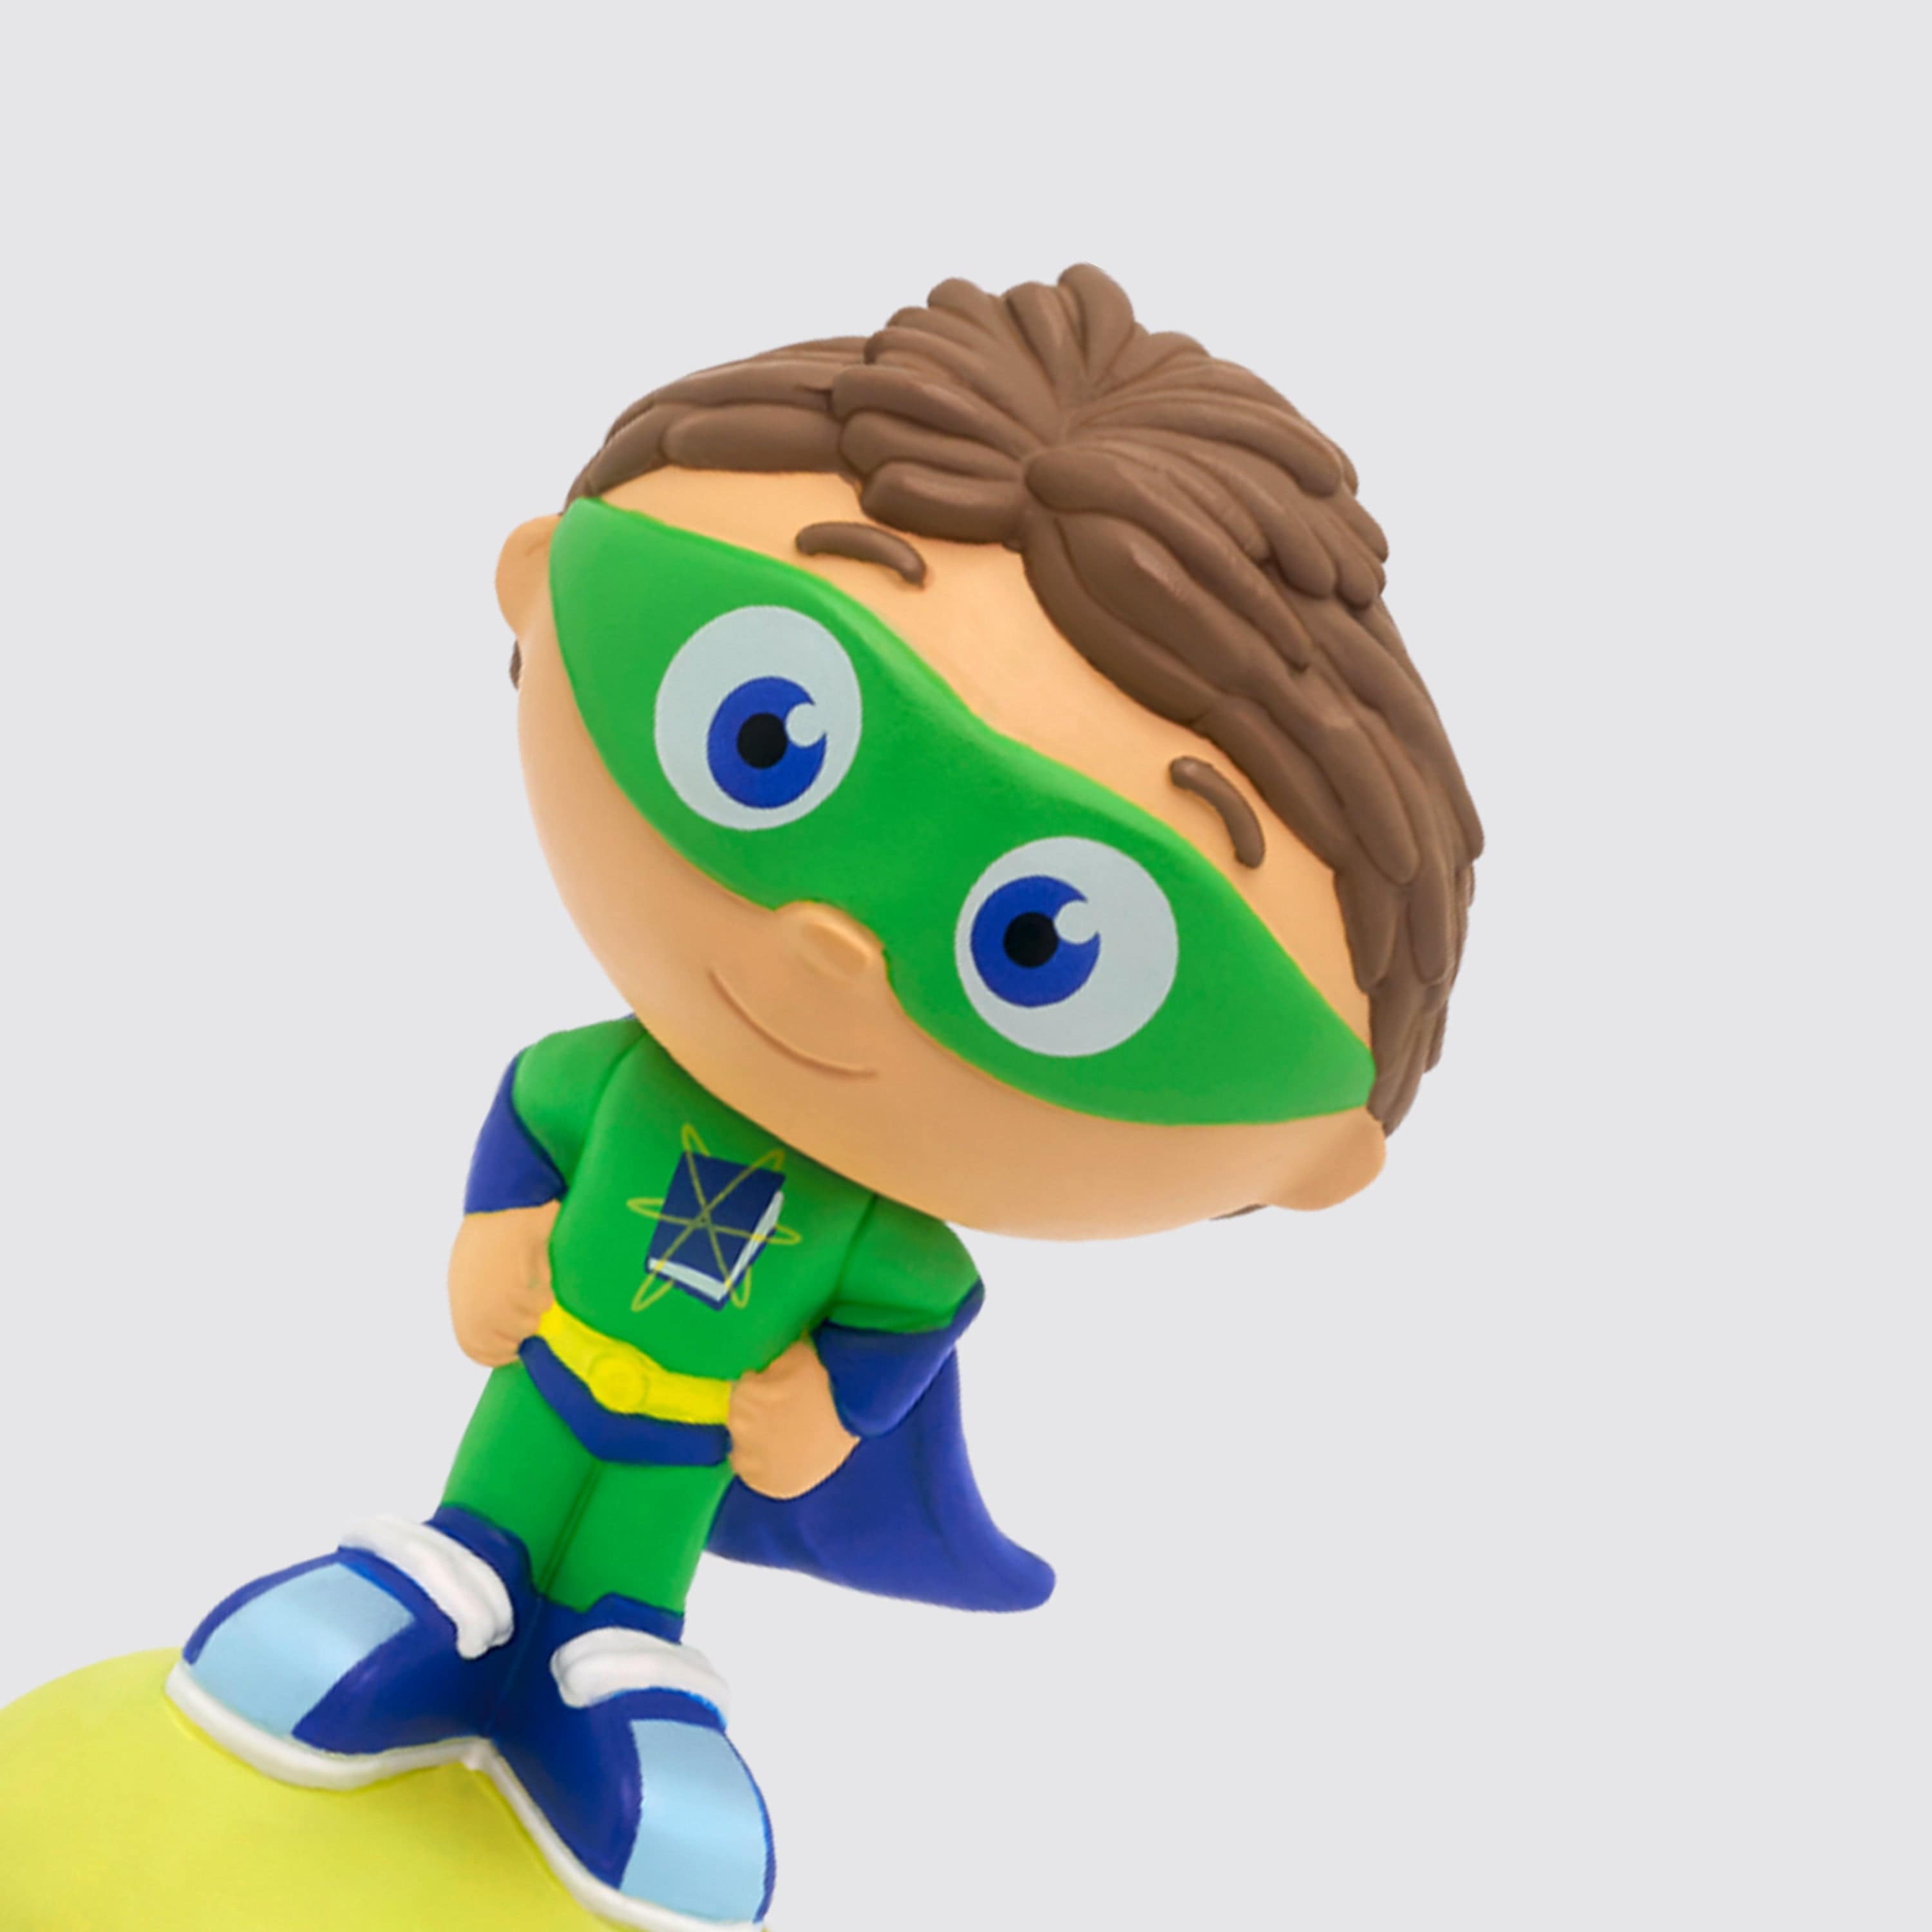 super why character toys